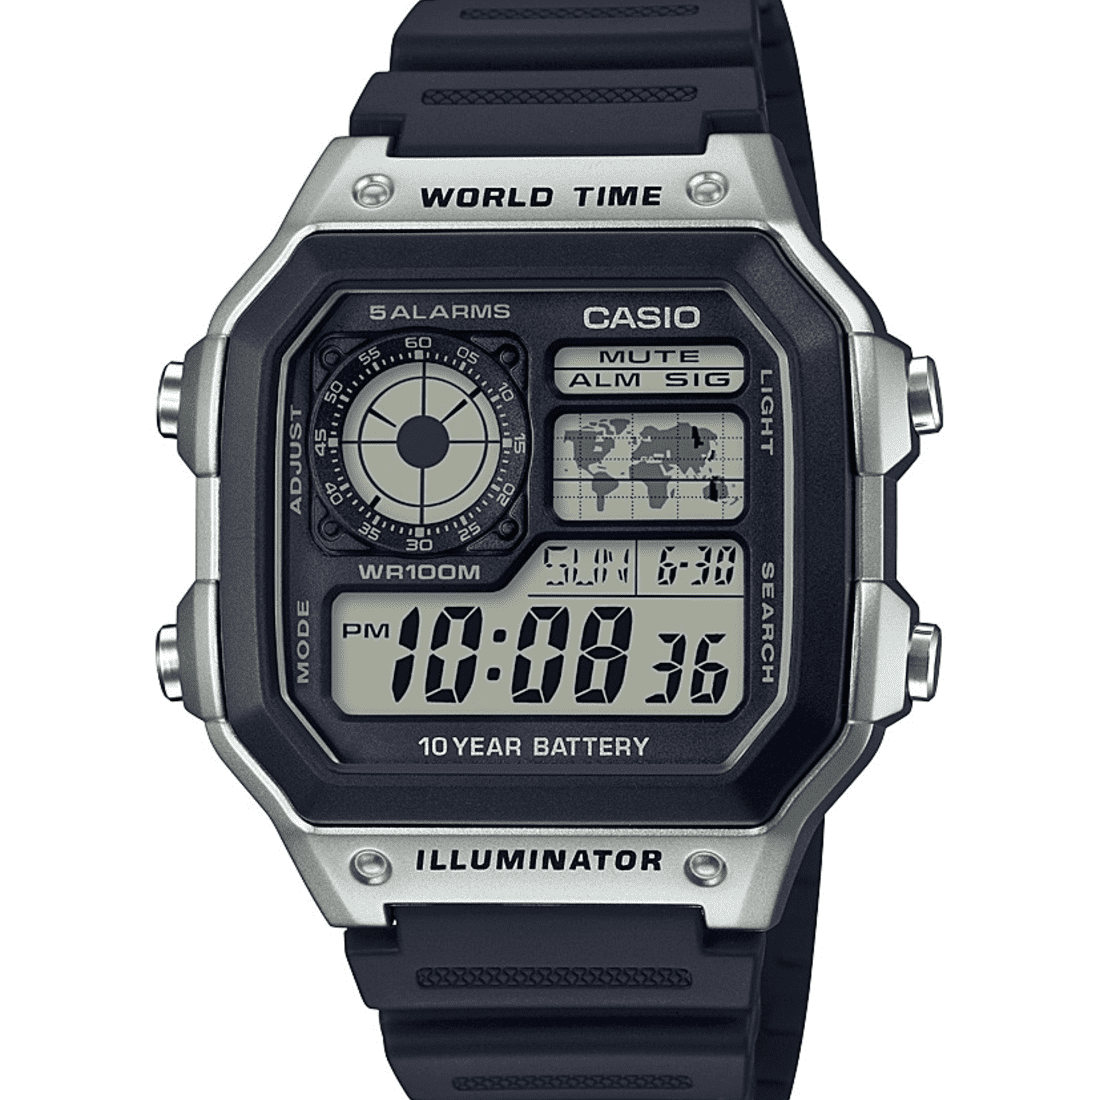 Casio World Time 4 Time Zones Display 5 Alarms Watch AE1200WH-1AV New  4971850869979